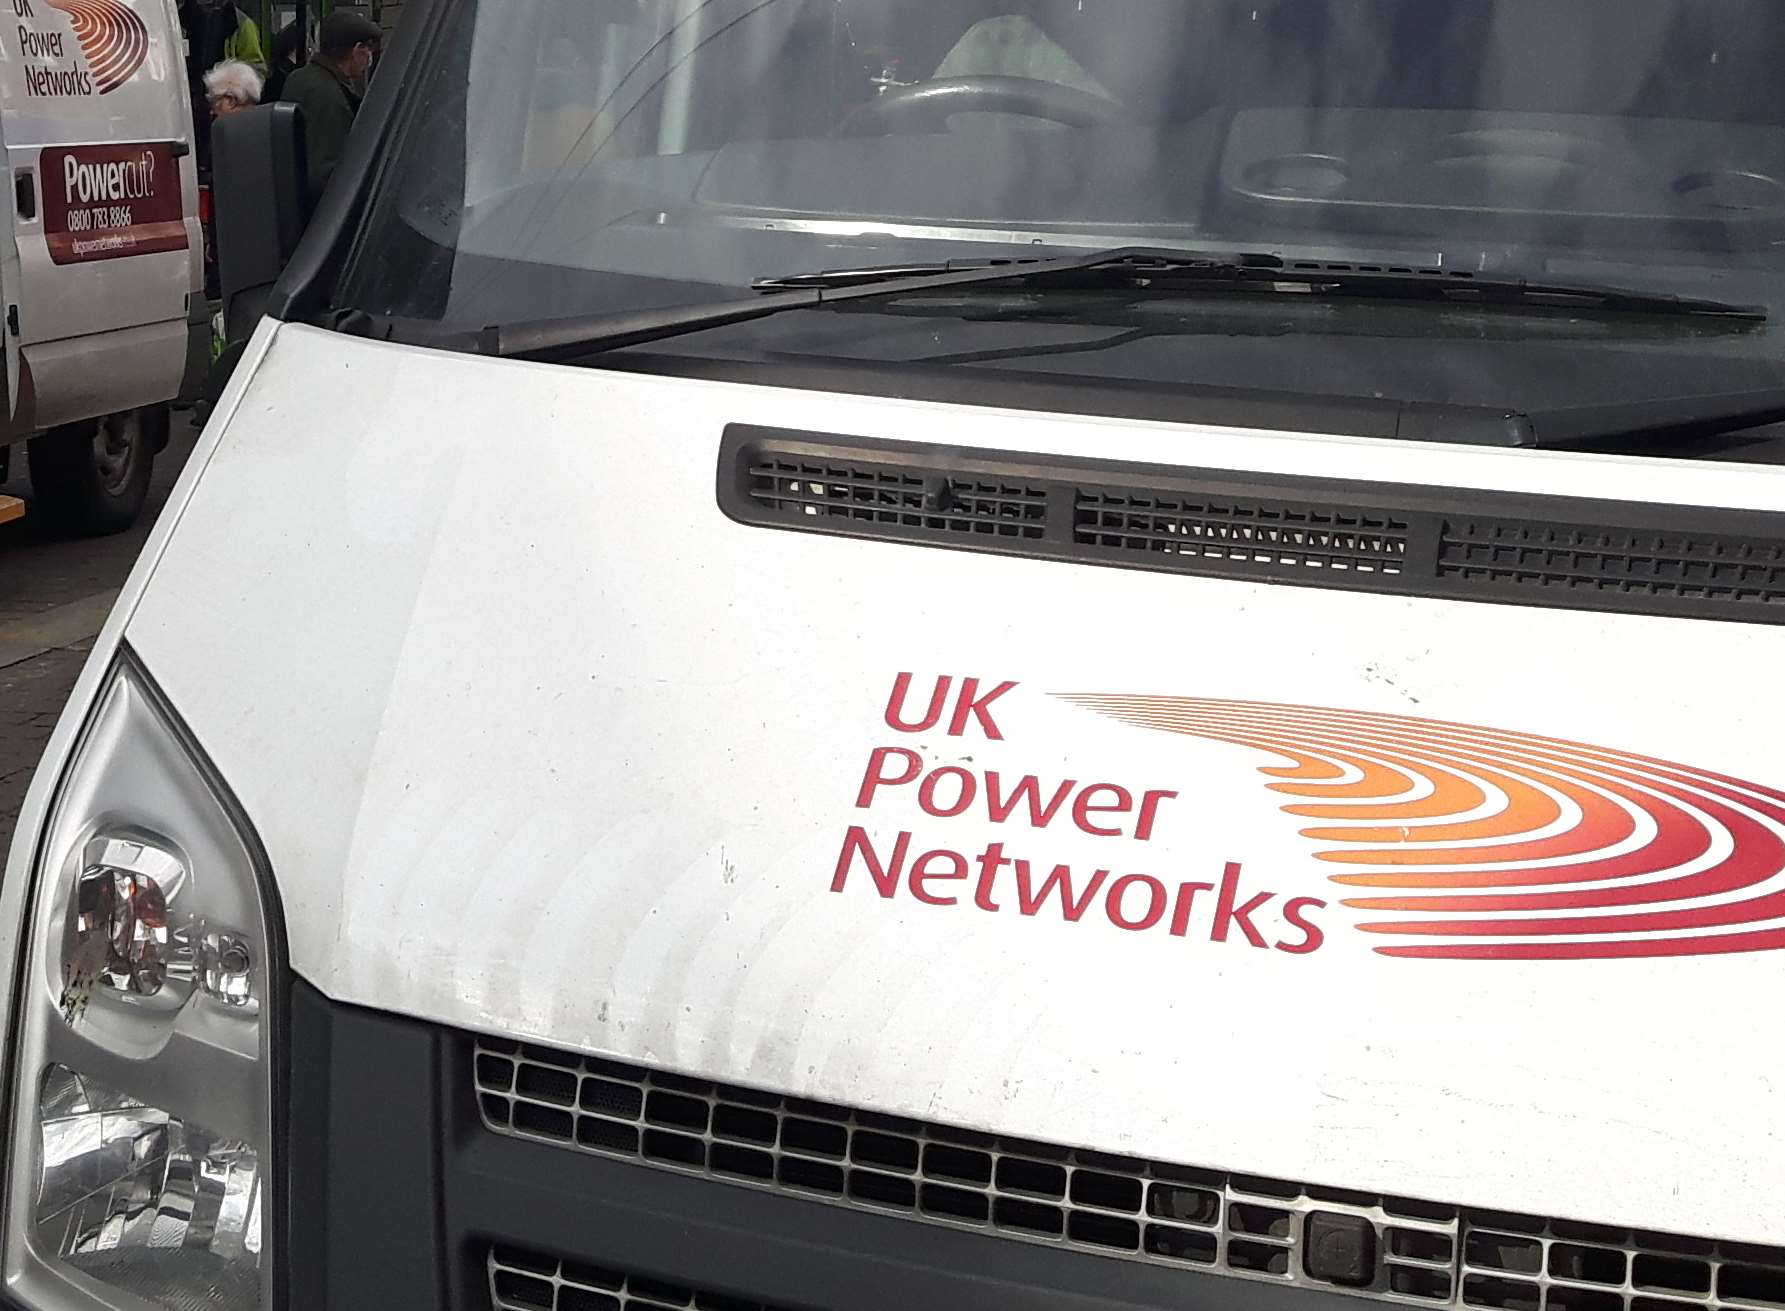 UK Power Networks were on the scene